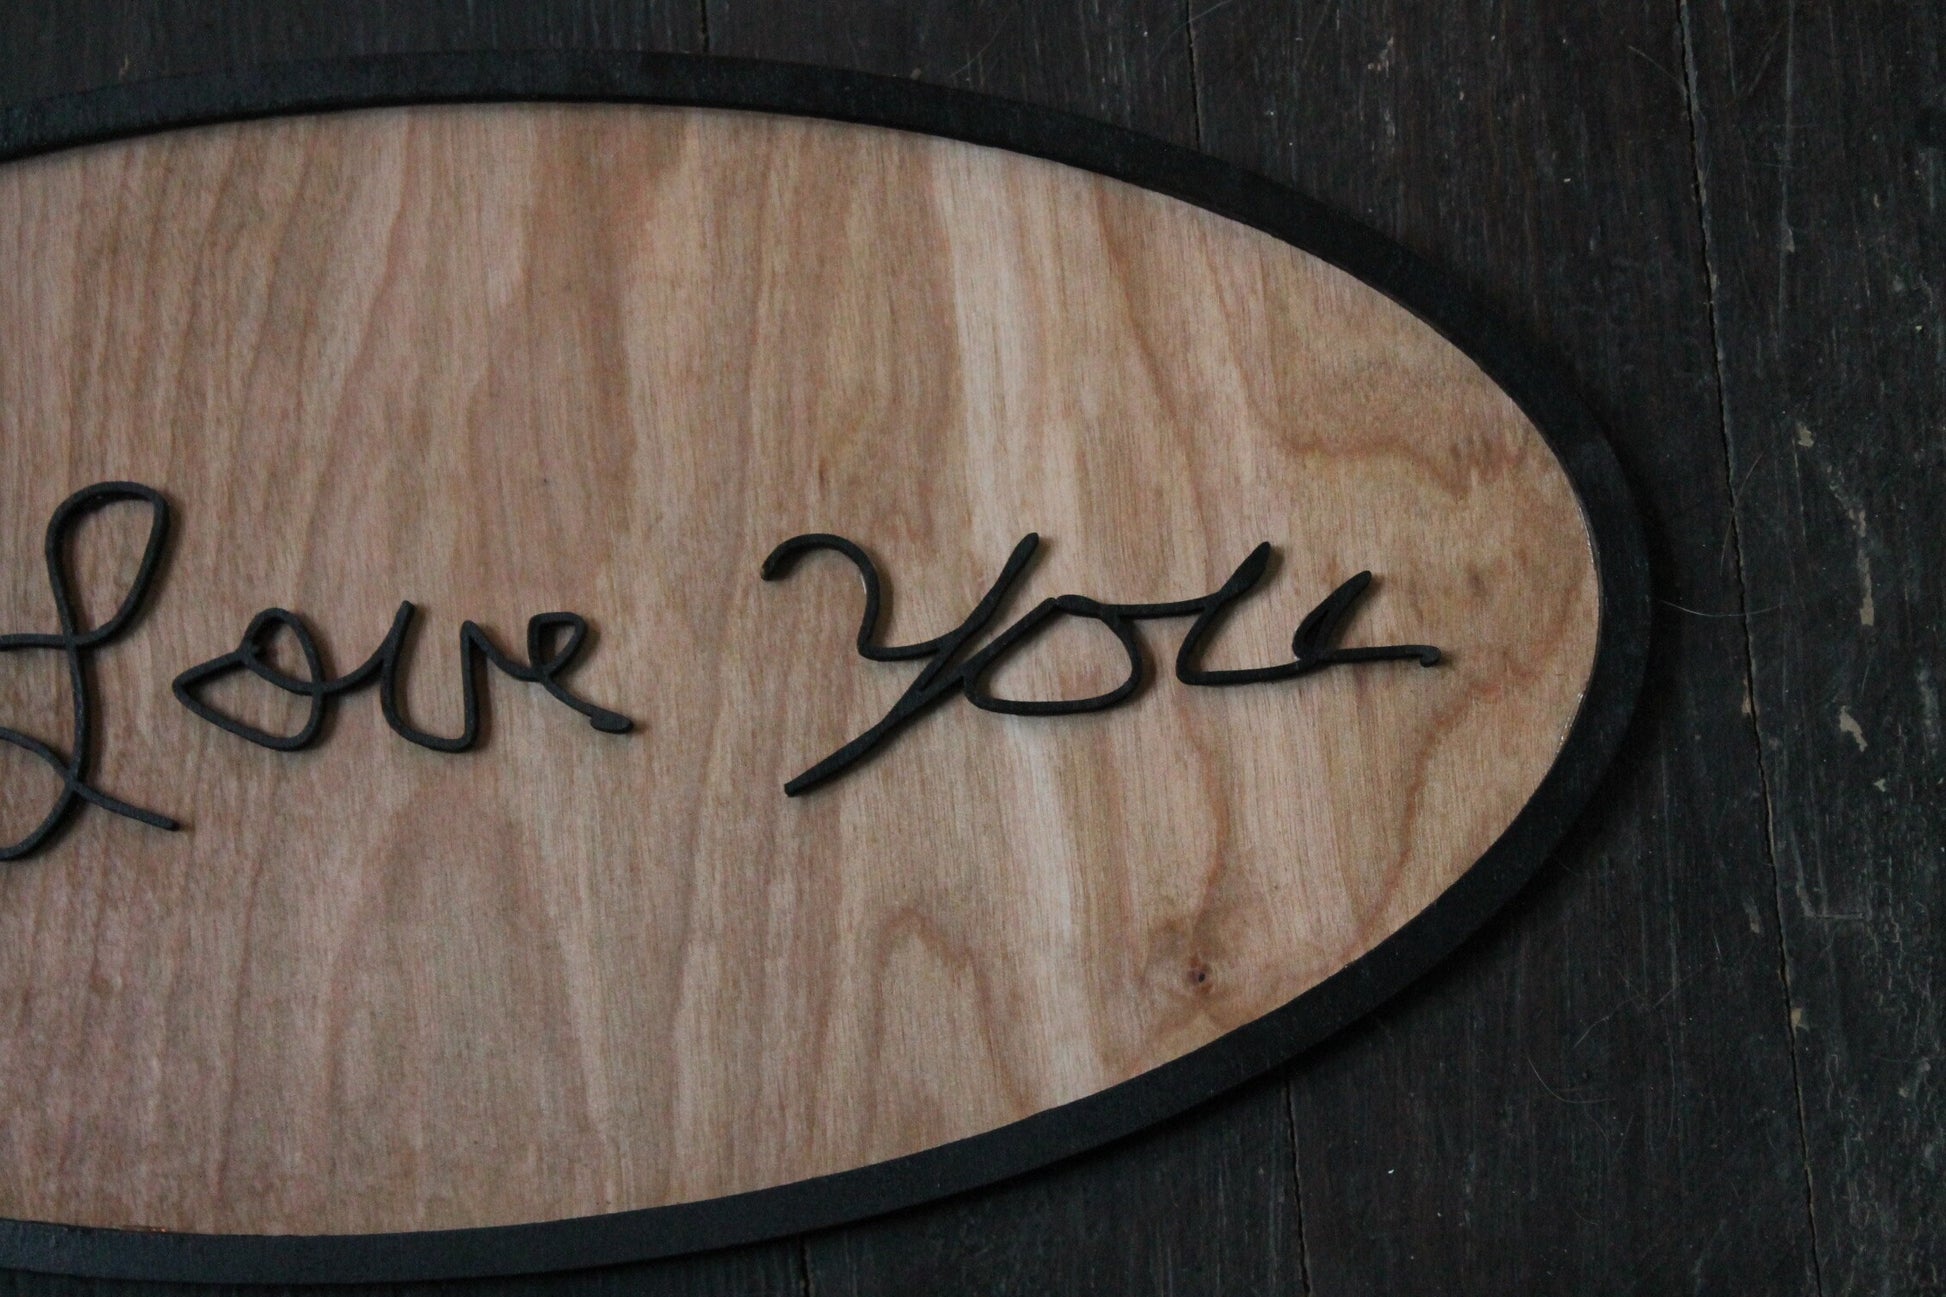 Your Handwriting, Actual Hand writing sign, Oval, Framed, custom personalized wood decor shabby chic rustic primitive, handwriting